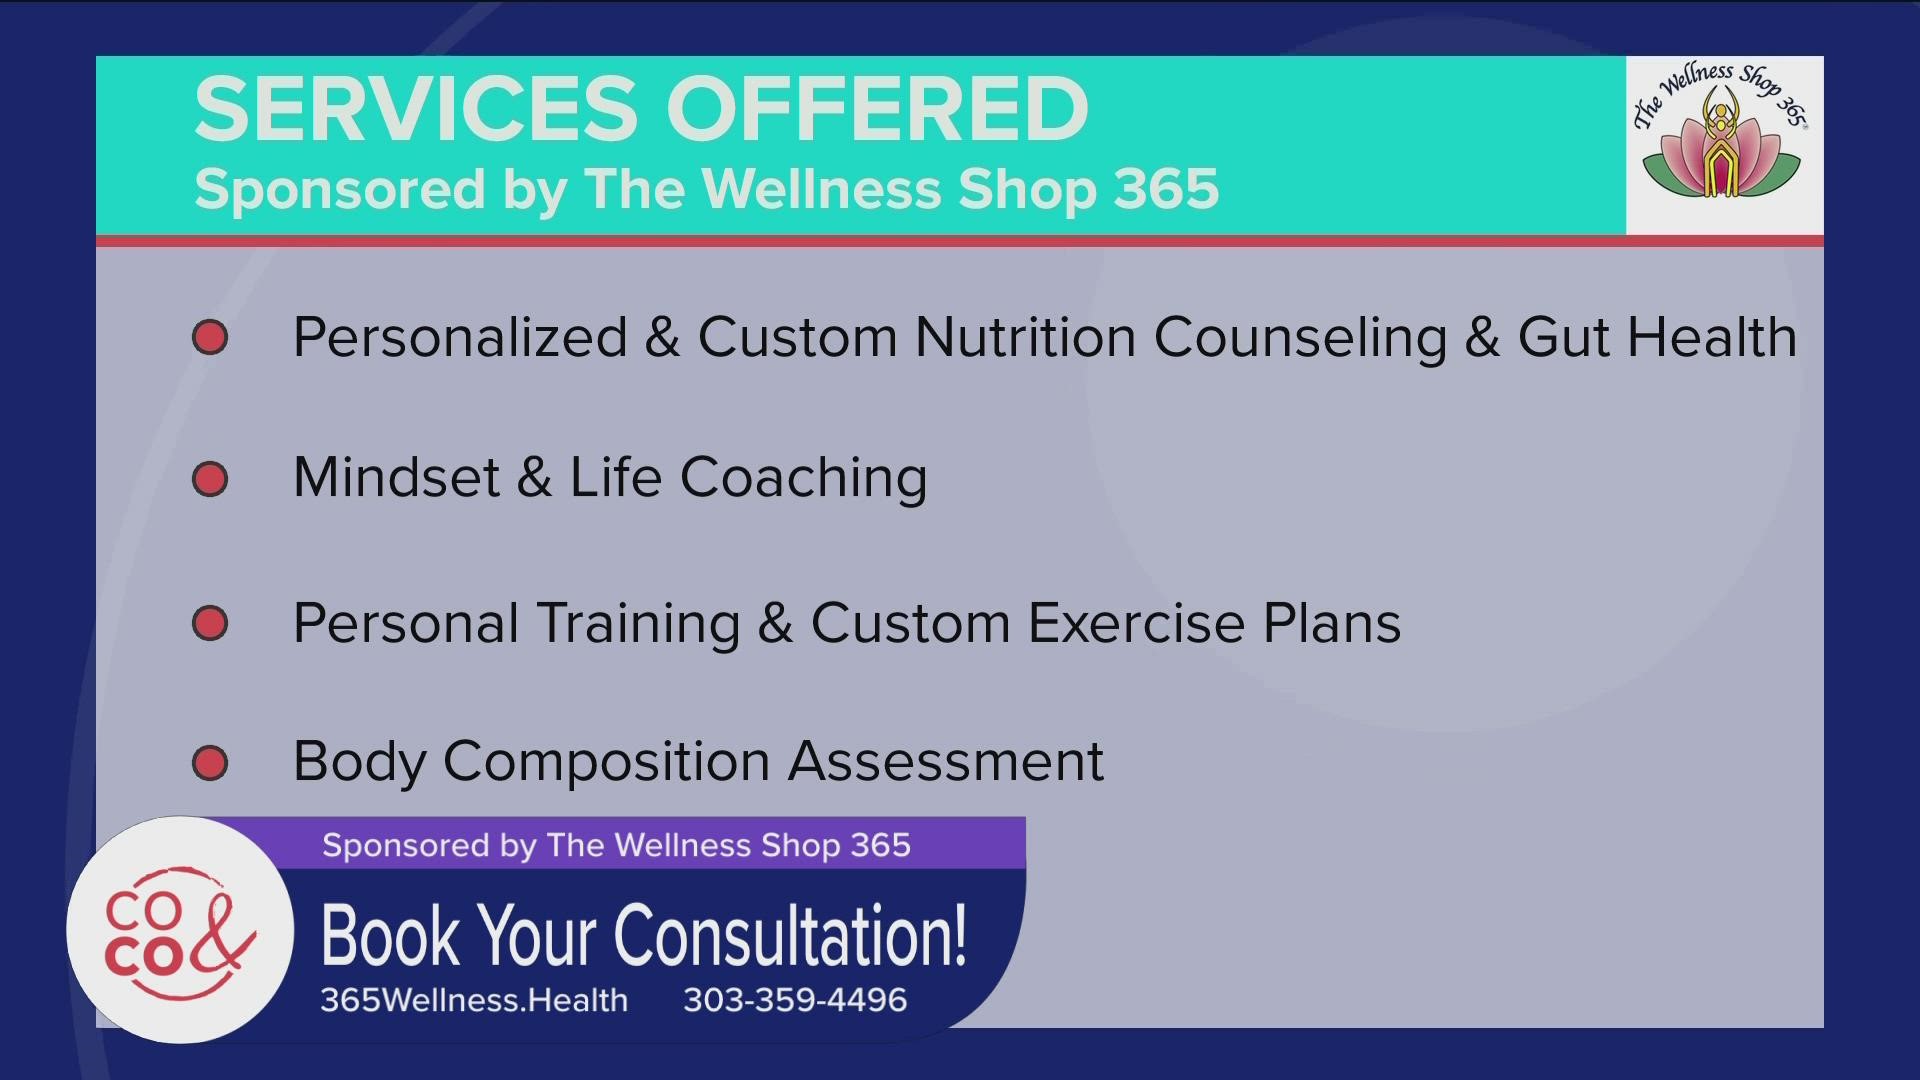 The Wellness Shop 365 is offering a 60-minute consultation for just $197! Learn more and get started at 365Wellness.health. **PAID CONTENT**